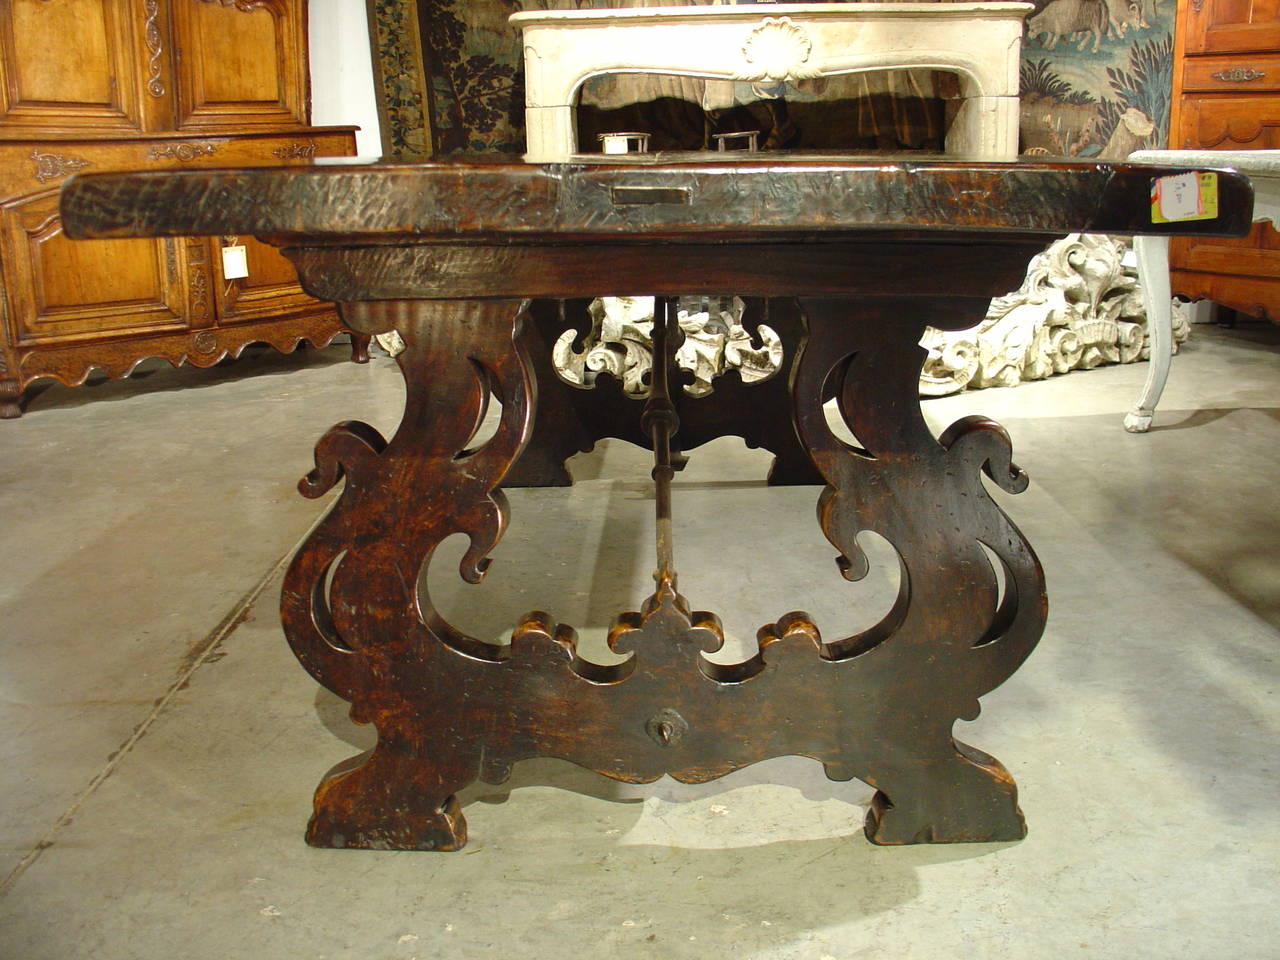 From Tuscany Italy, comes this majestic walnut wood table with hand forged iron shaped stretcher and lyre shaped legs.  The legs are pierced, delineating the outer edges of a stylized bird.  It dates to the first half of the 1800’s and has a deep